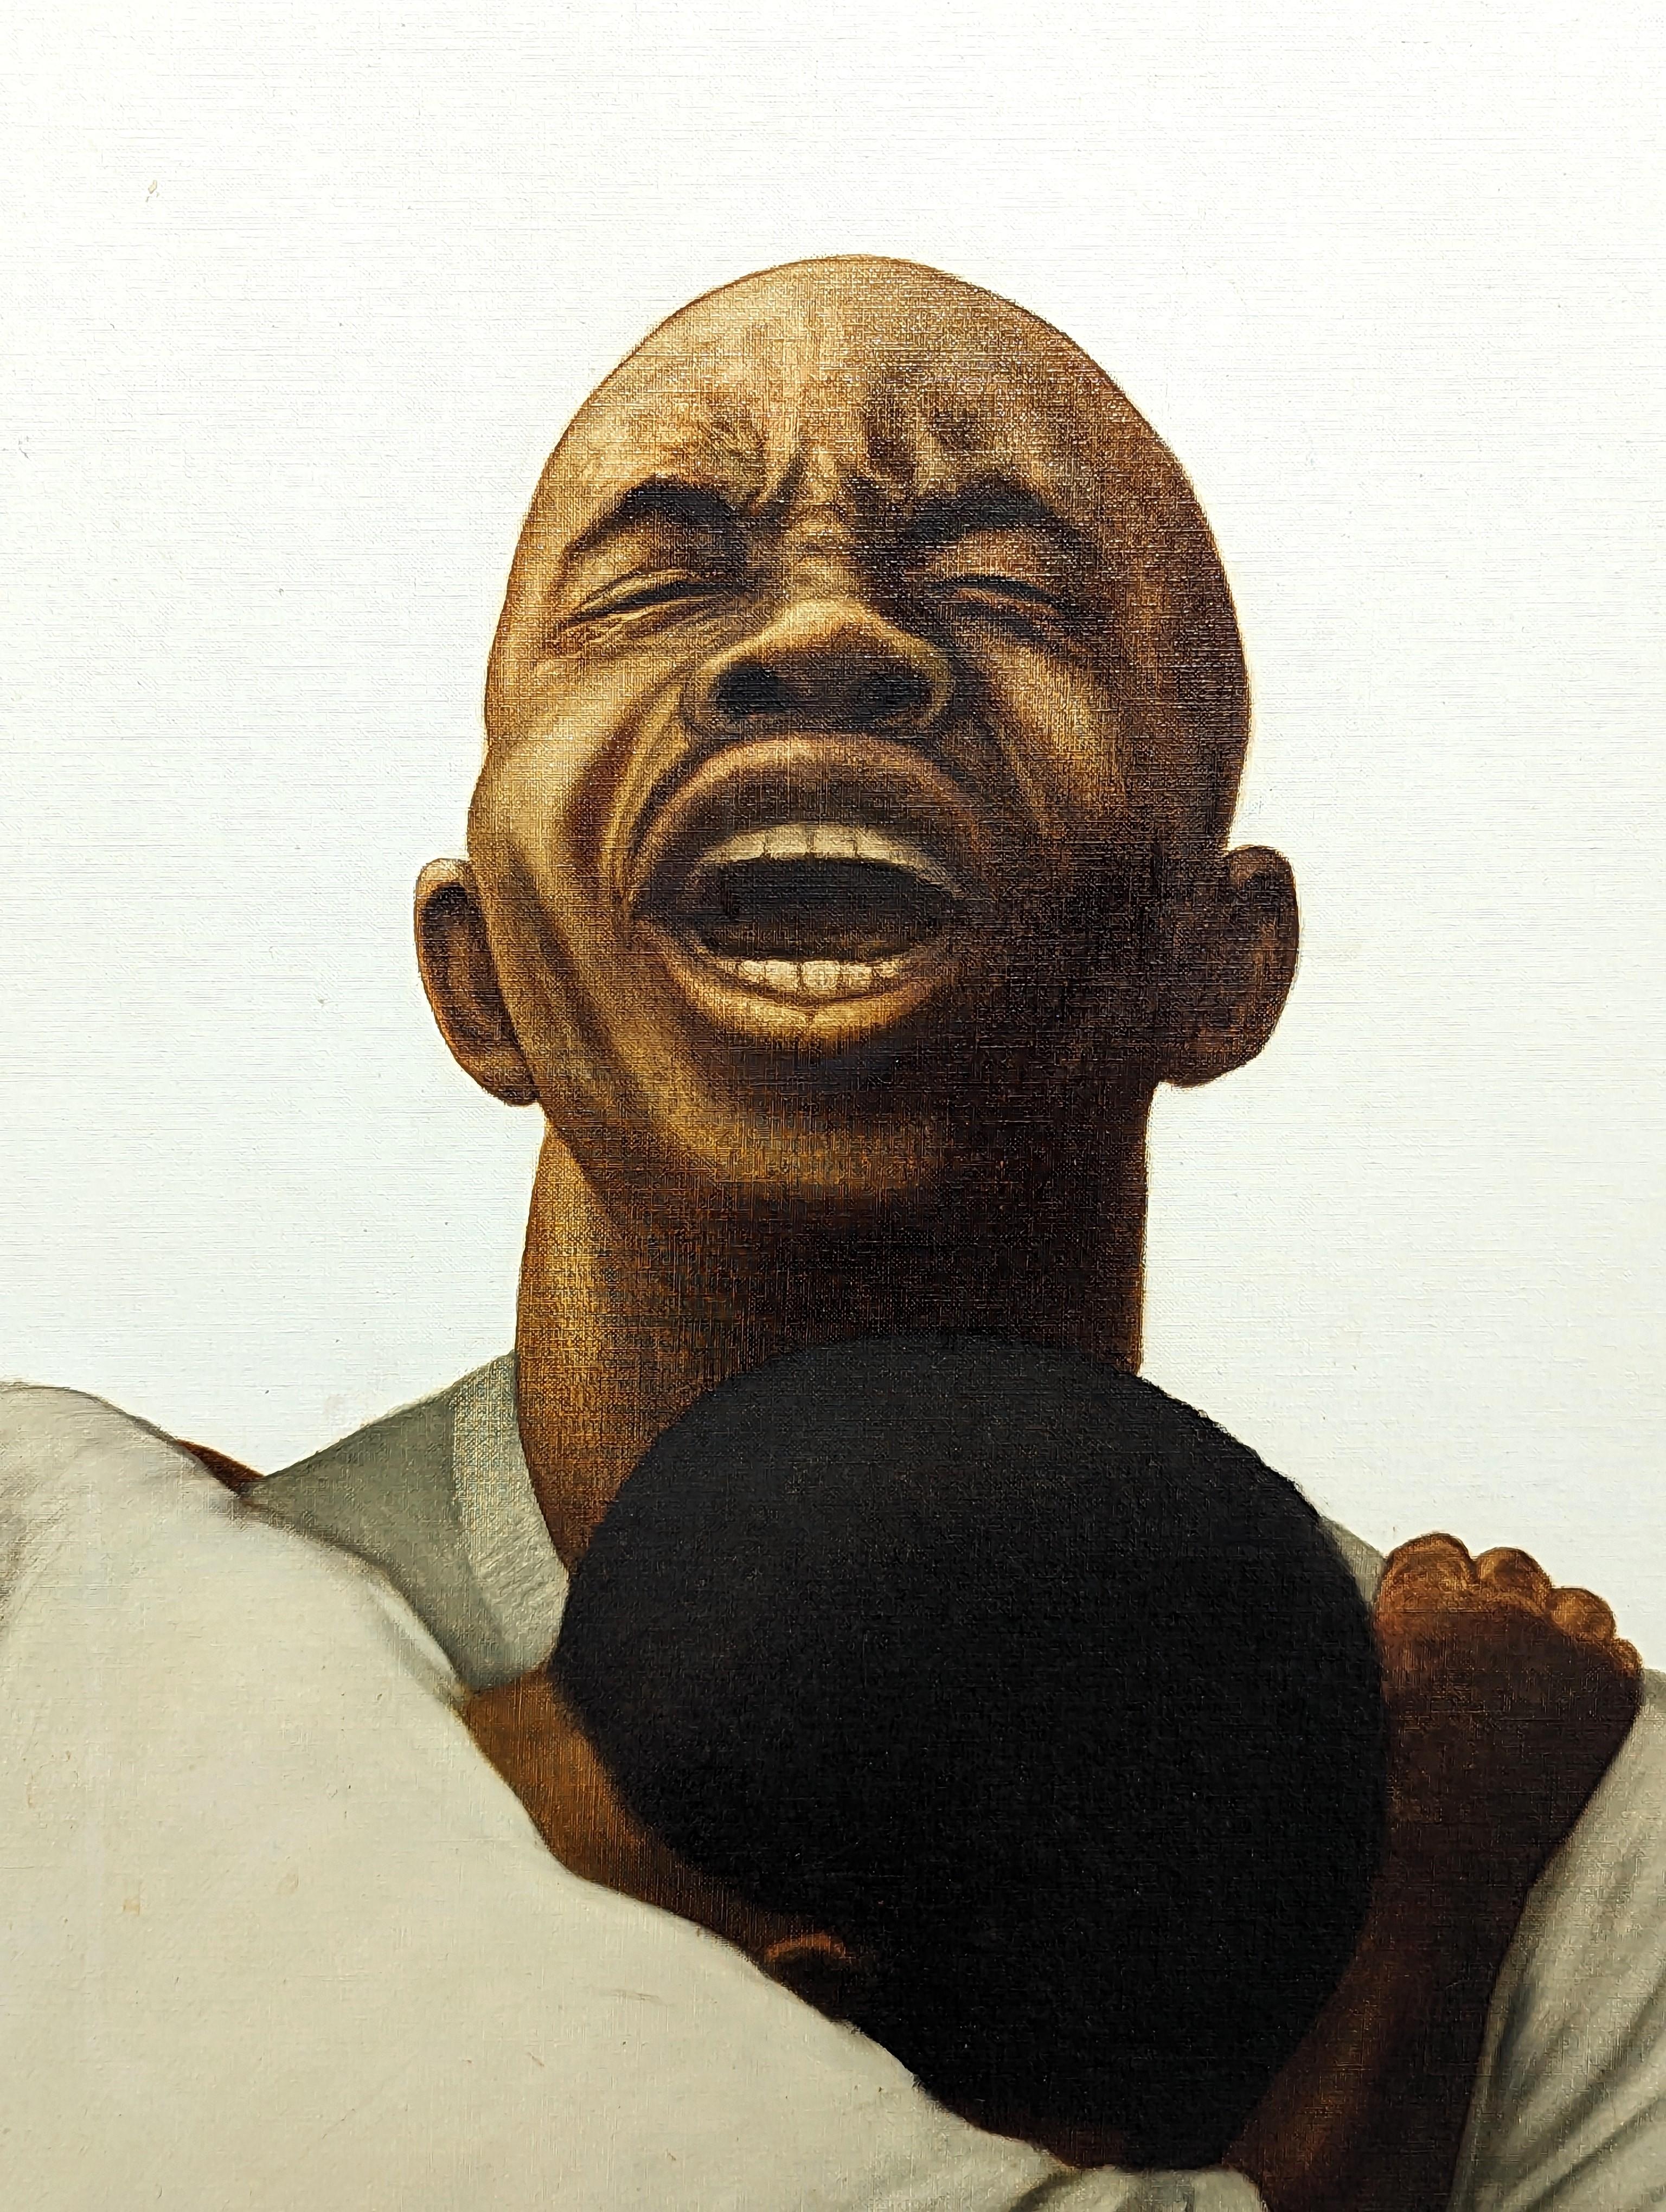 Early figurative portrait painting by Houston-based artist Buford Evans. The work features a black man looking to the sky with an anguished expression on his face as a young child clings to him. Signed and dated by the artist in the front lower